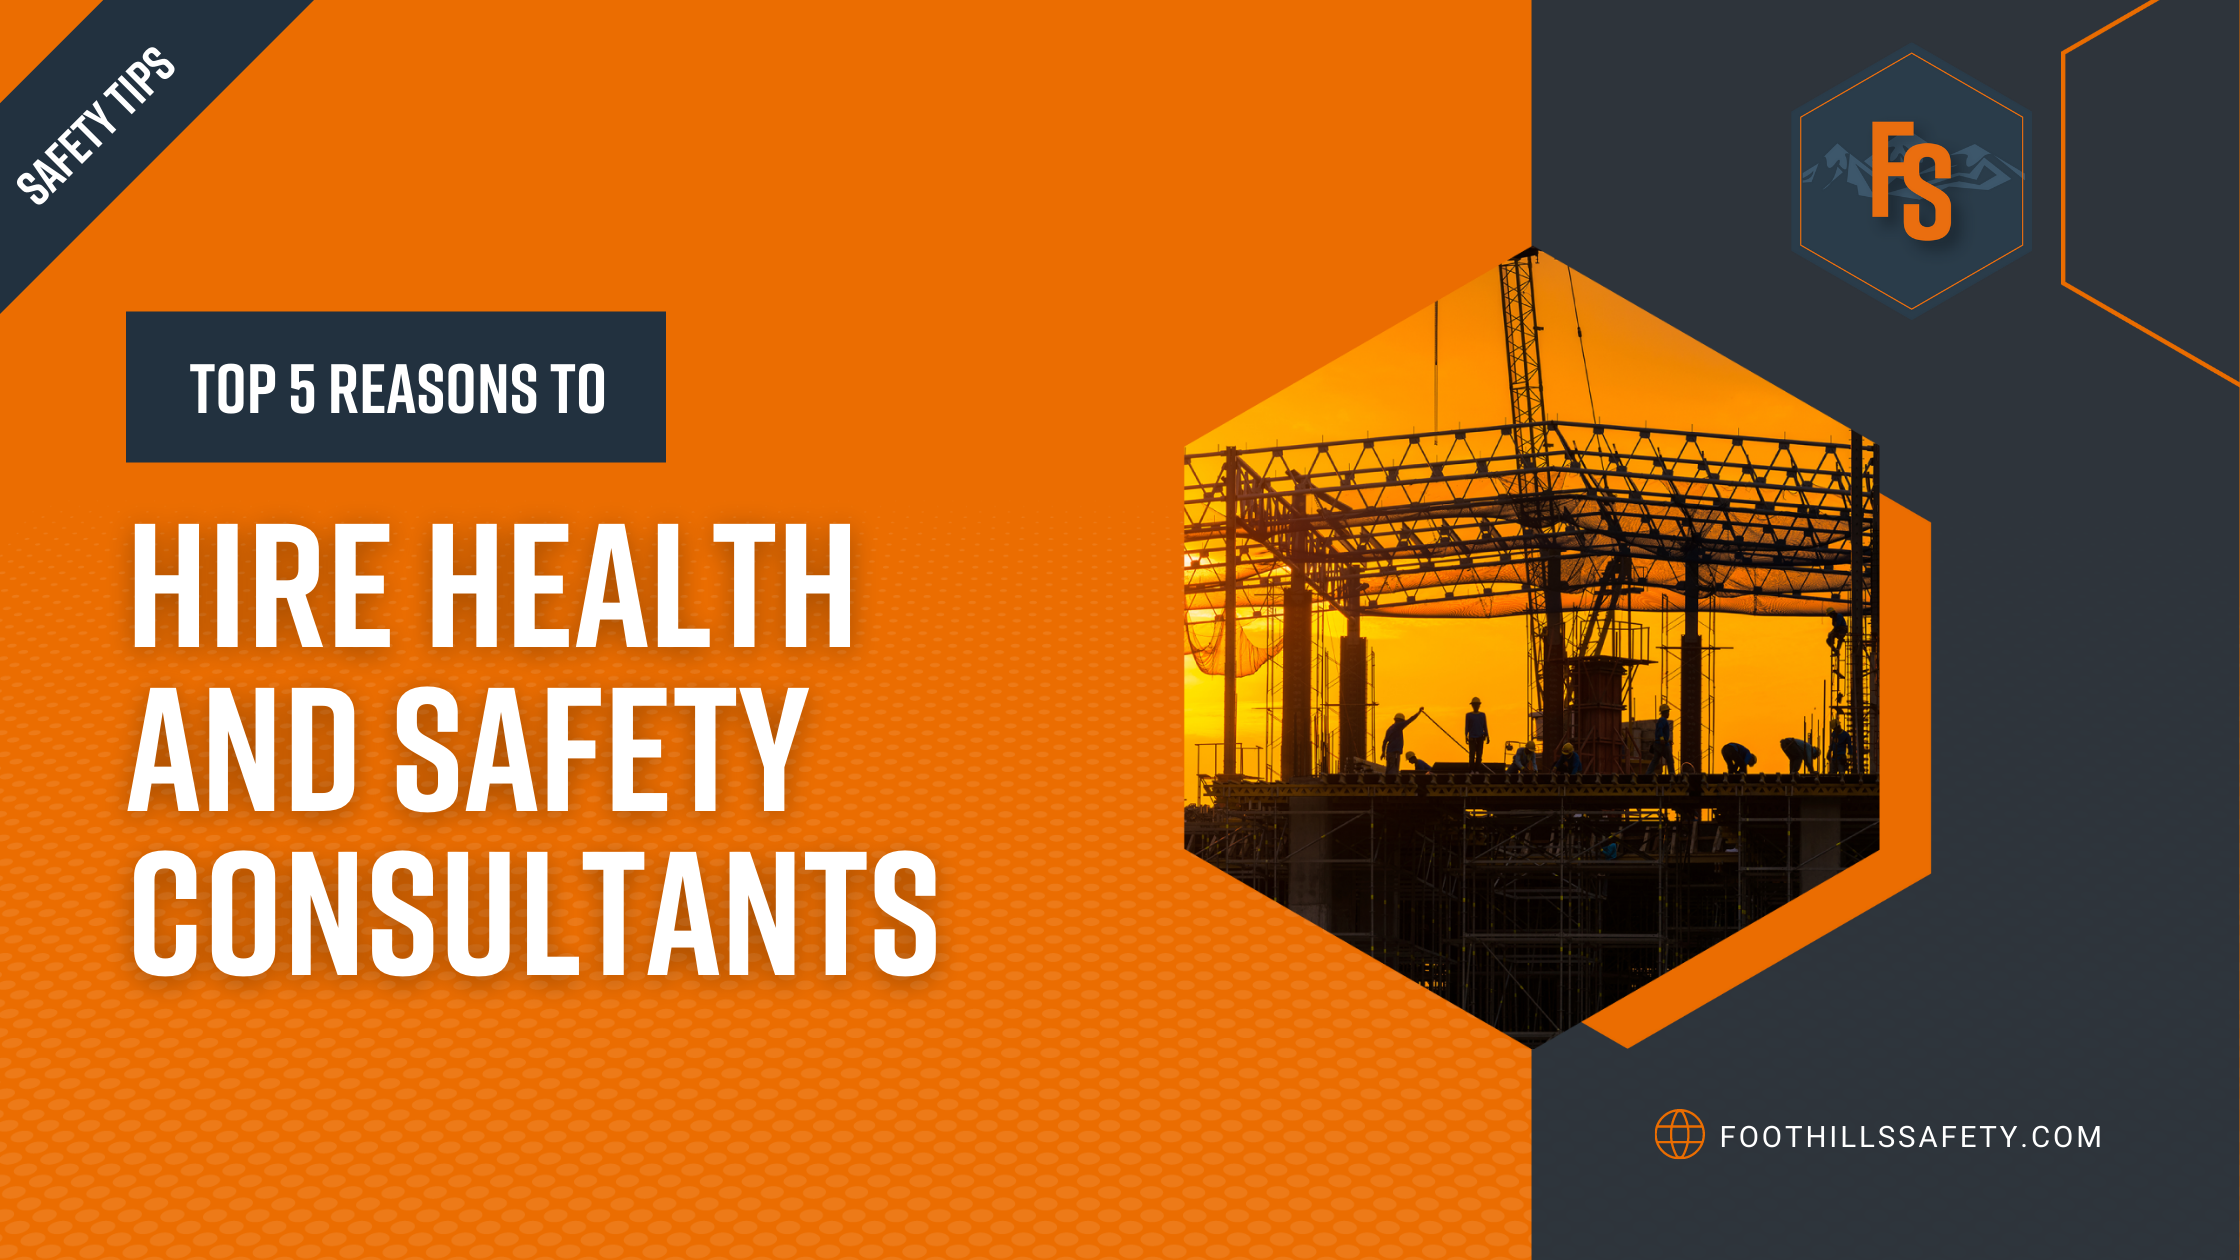 Top 5 Reasons to Hire Health and Safety Consultants